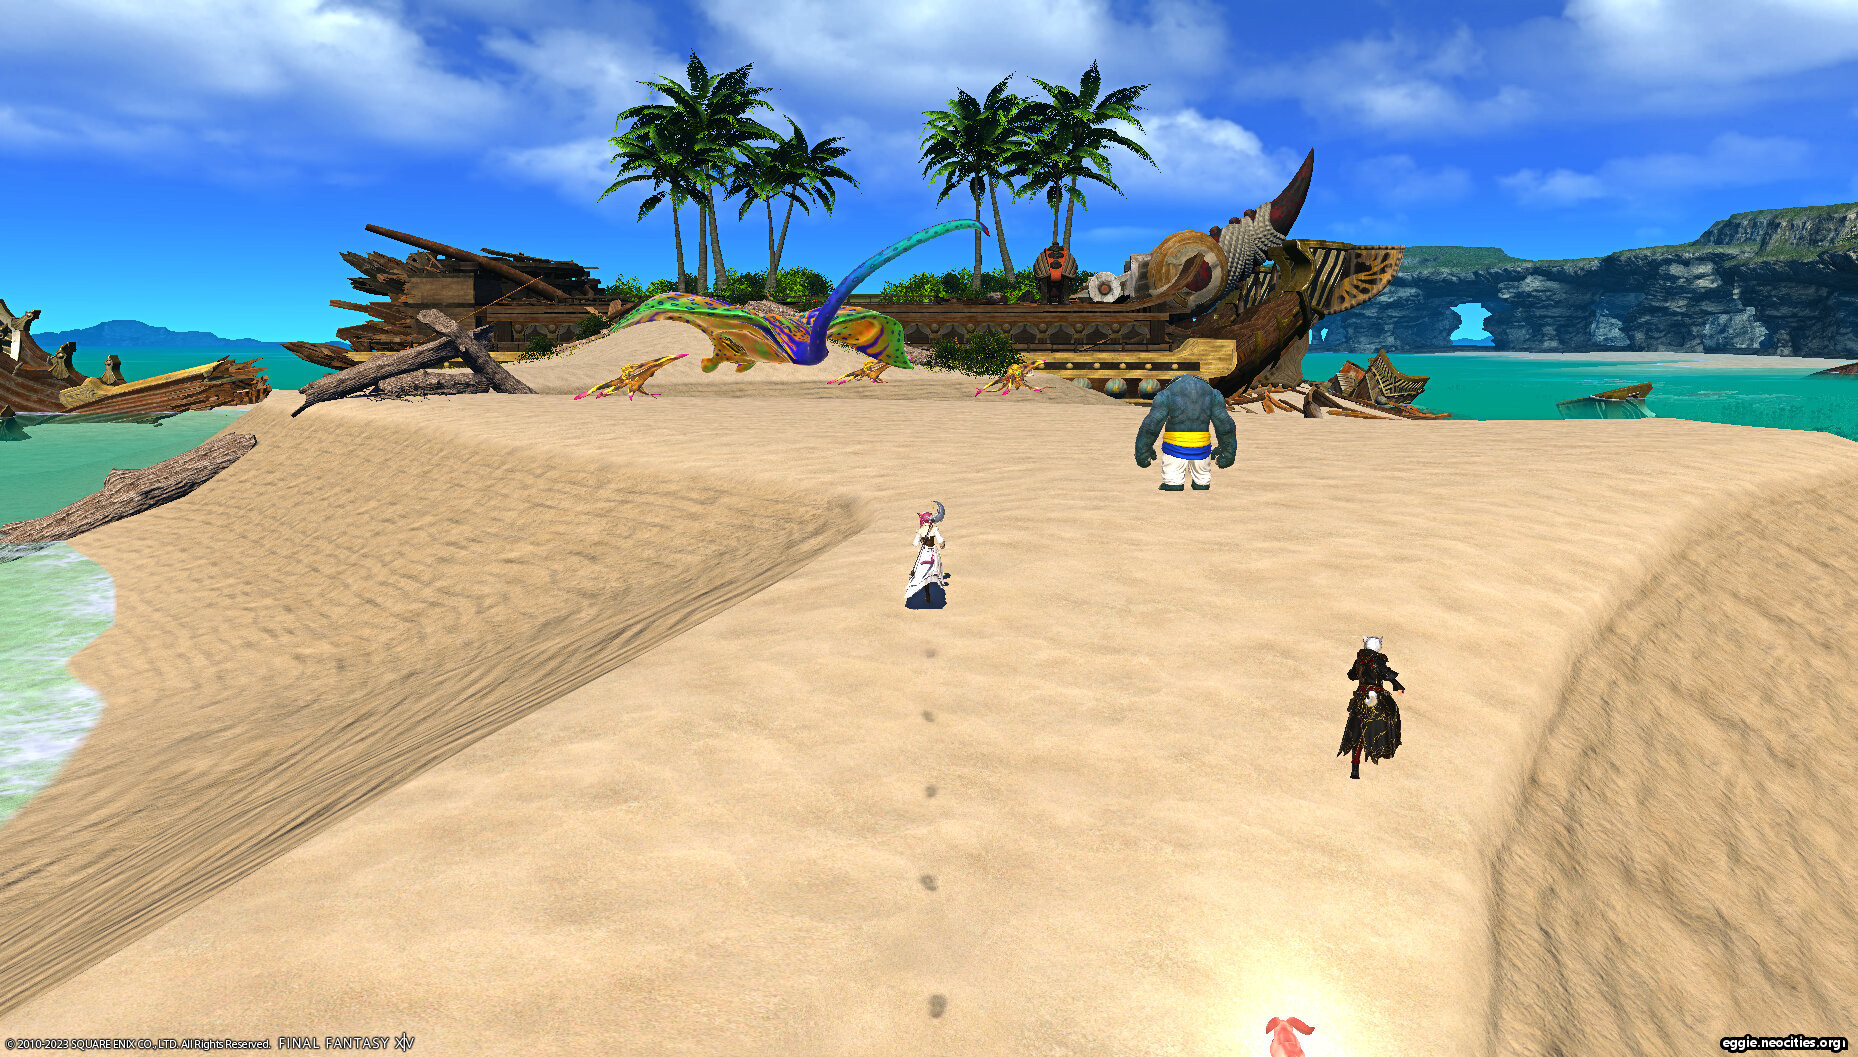 Aloalo dungeon, Zel running on the beach behind Matsya, with Xarale behind her to the right/